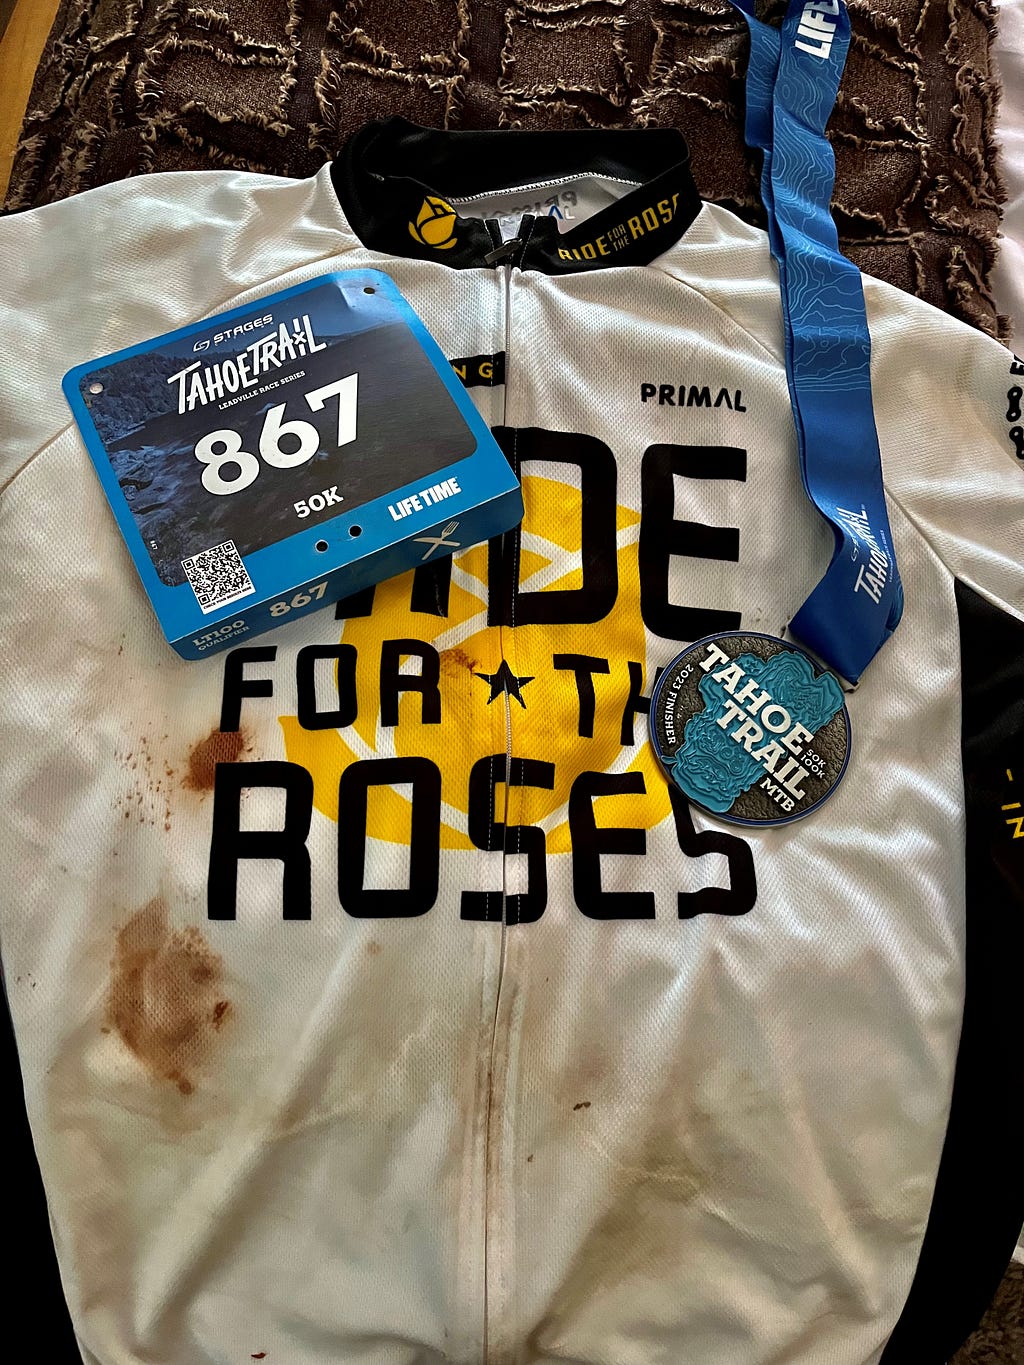 Cycling number, cycling race bib, and finisher’s medal